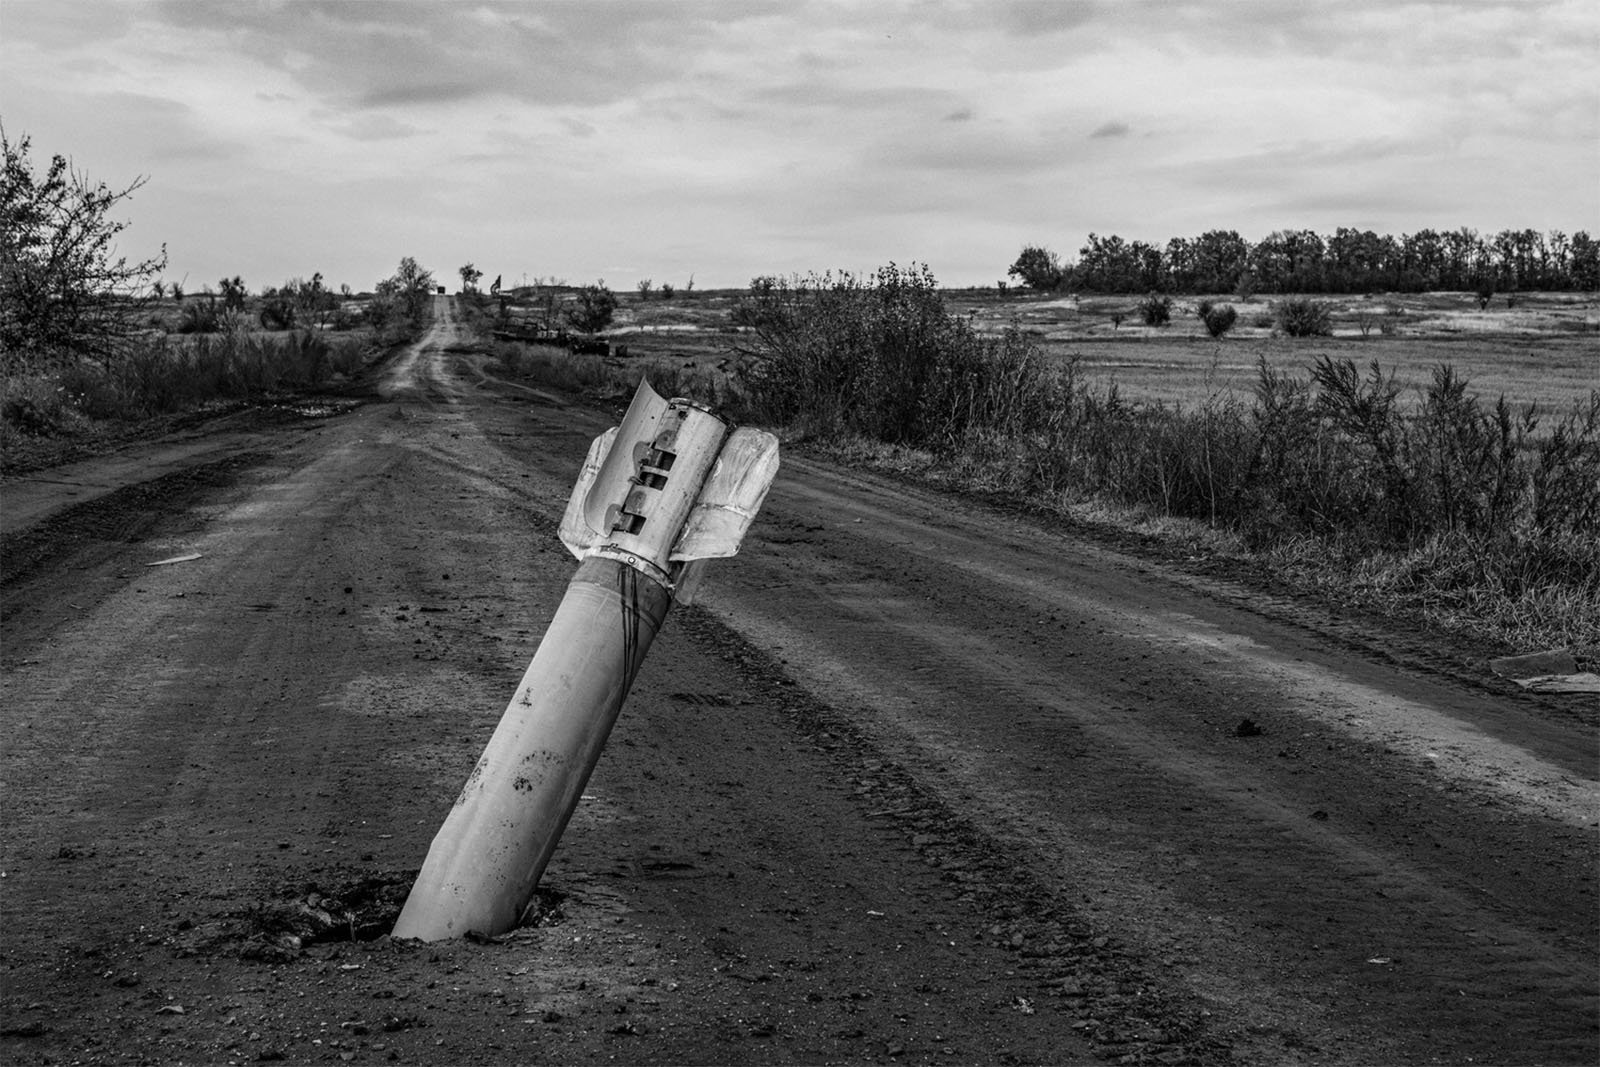 Black and white photo showing a large, unexploded missile lodged in the center of a remote dirt road. The landscape is barren with sparse vegetation and a cloudy sky. Trees and shrubs line the road's edges in the background.